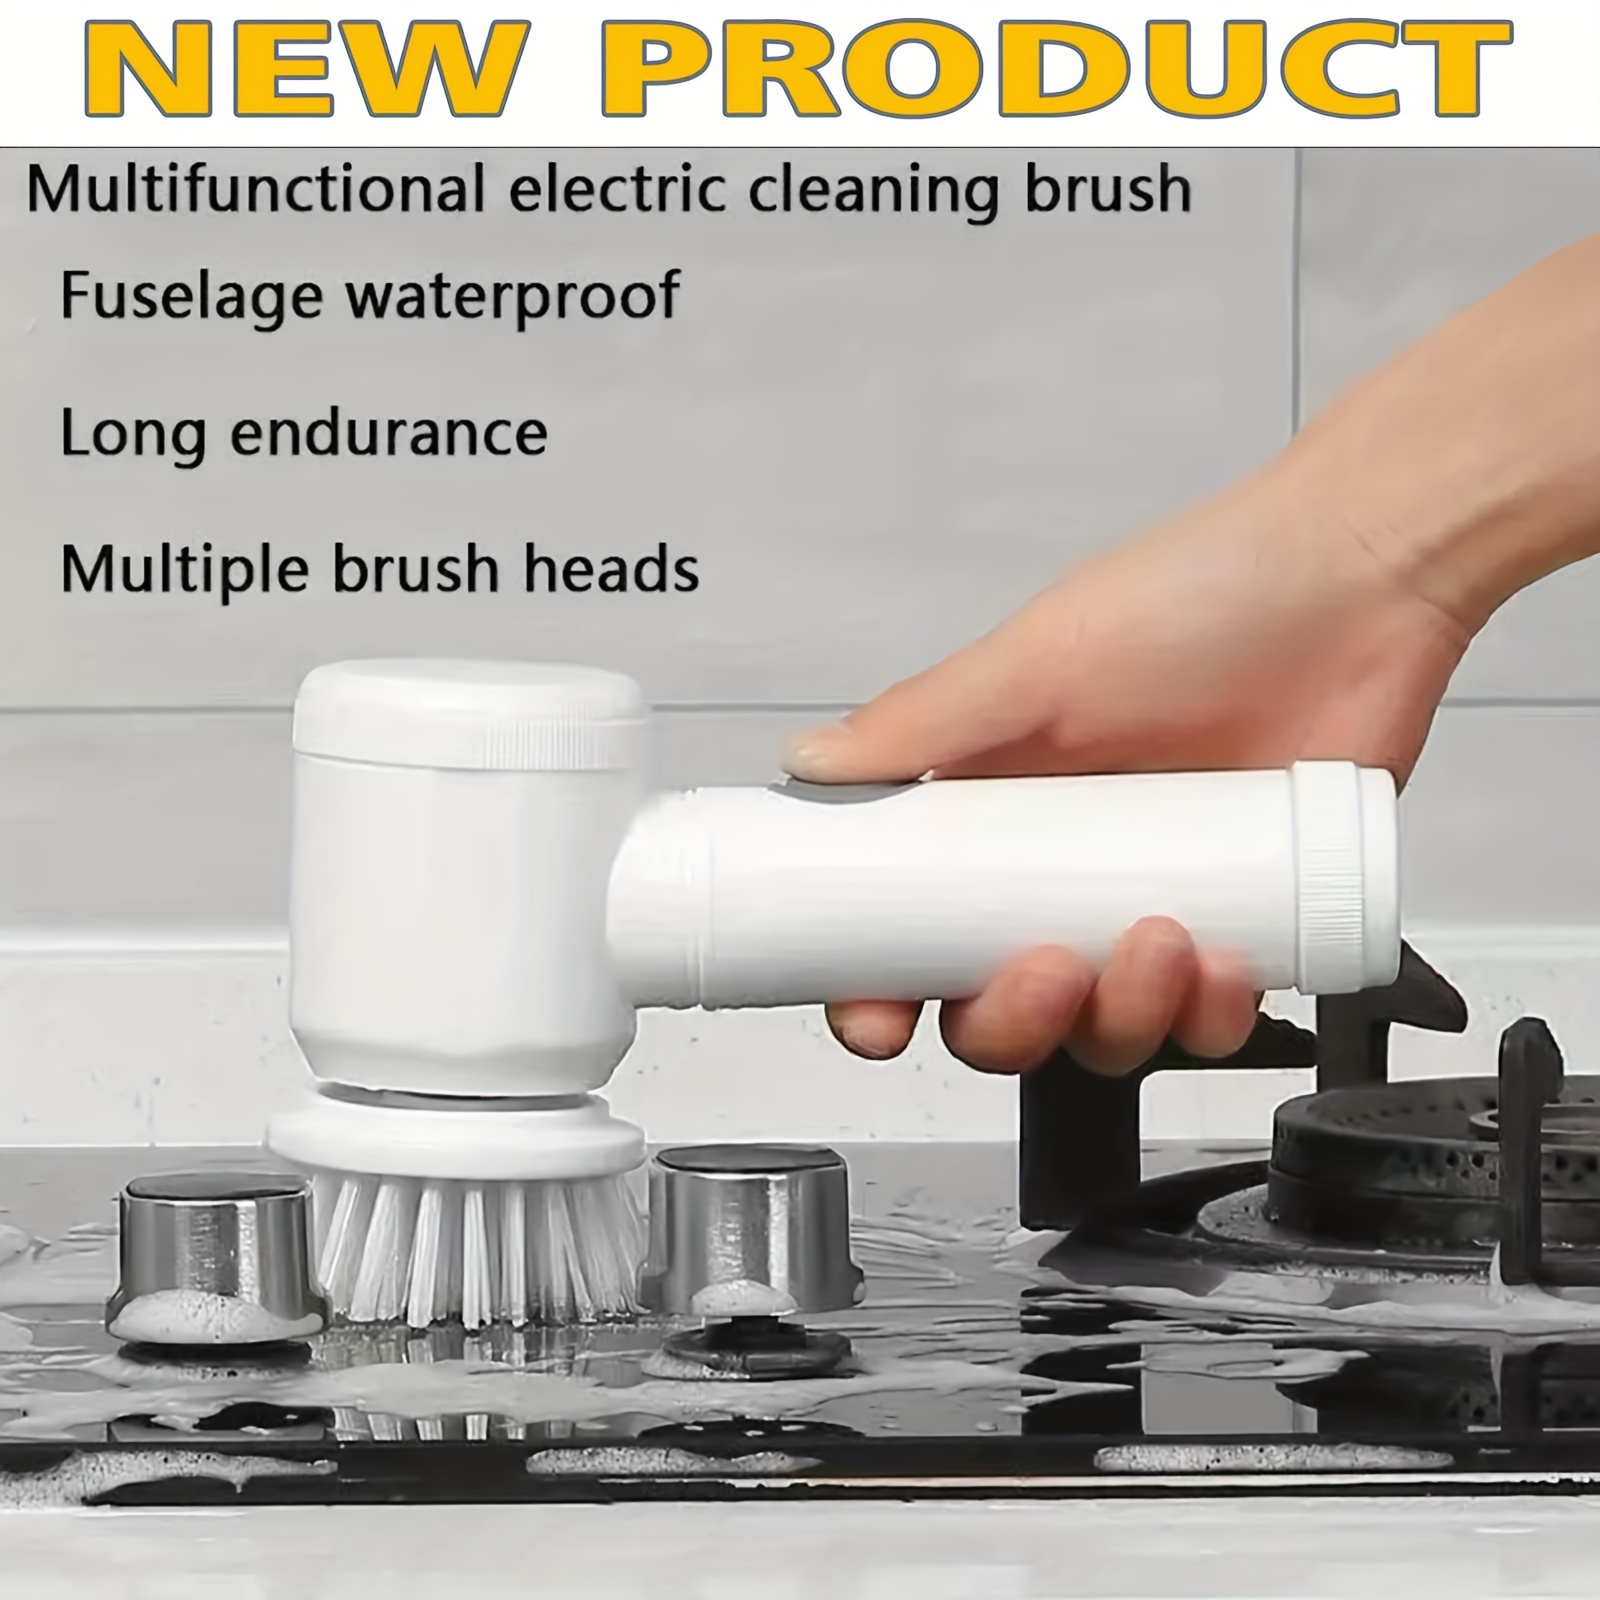 Electric Spin Scrubber Cleaning Brush Handheld Kitchen Bathroom Sink Cleaning Tool Automatic Cordless for Kitchen Bathroom Shower Tile, Size: 26188